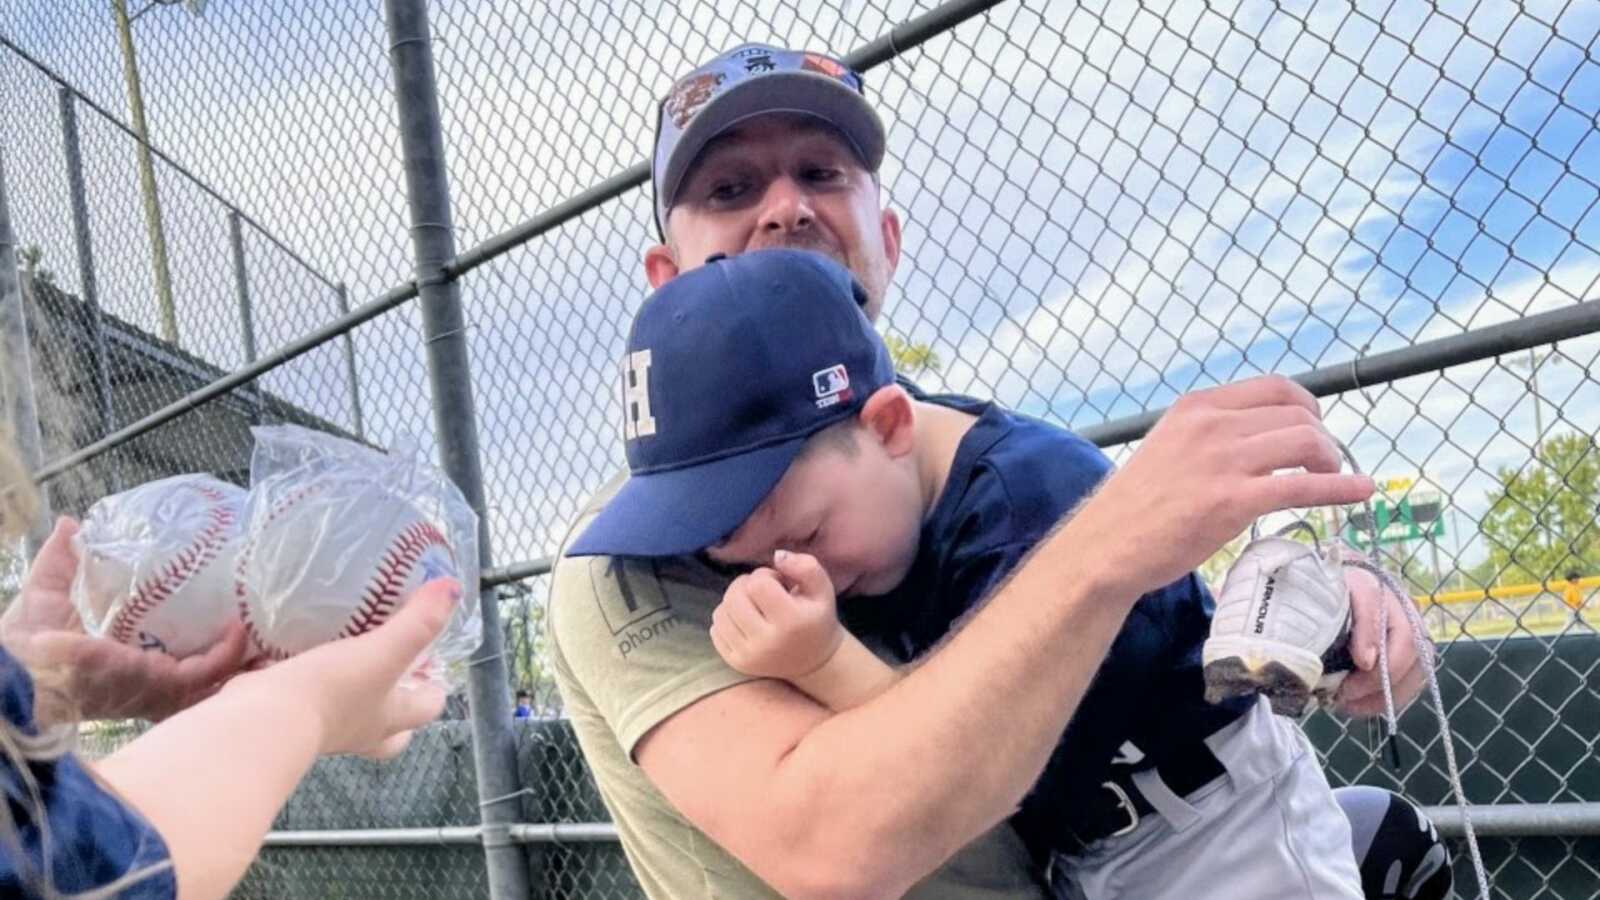 Son cries while hugging his father who surprised him at his t-ball game